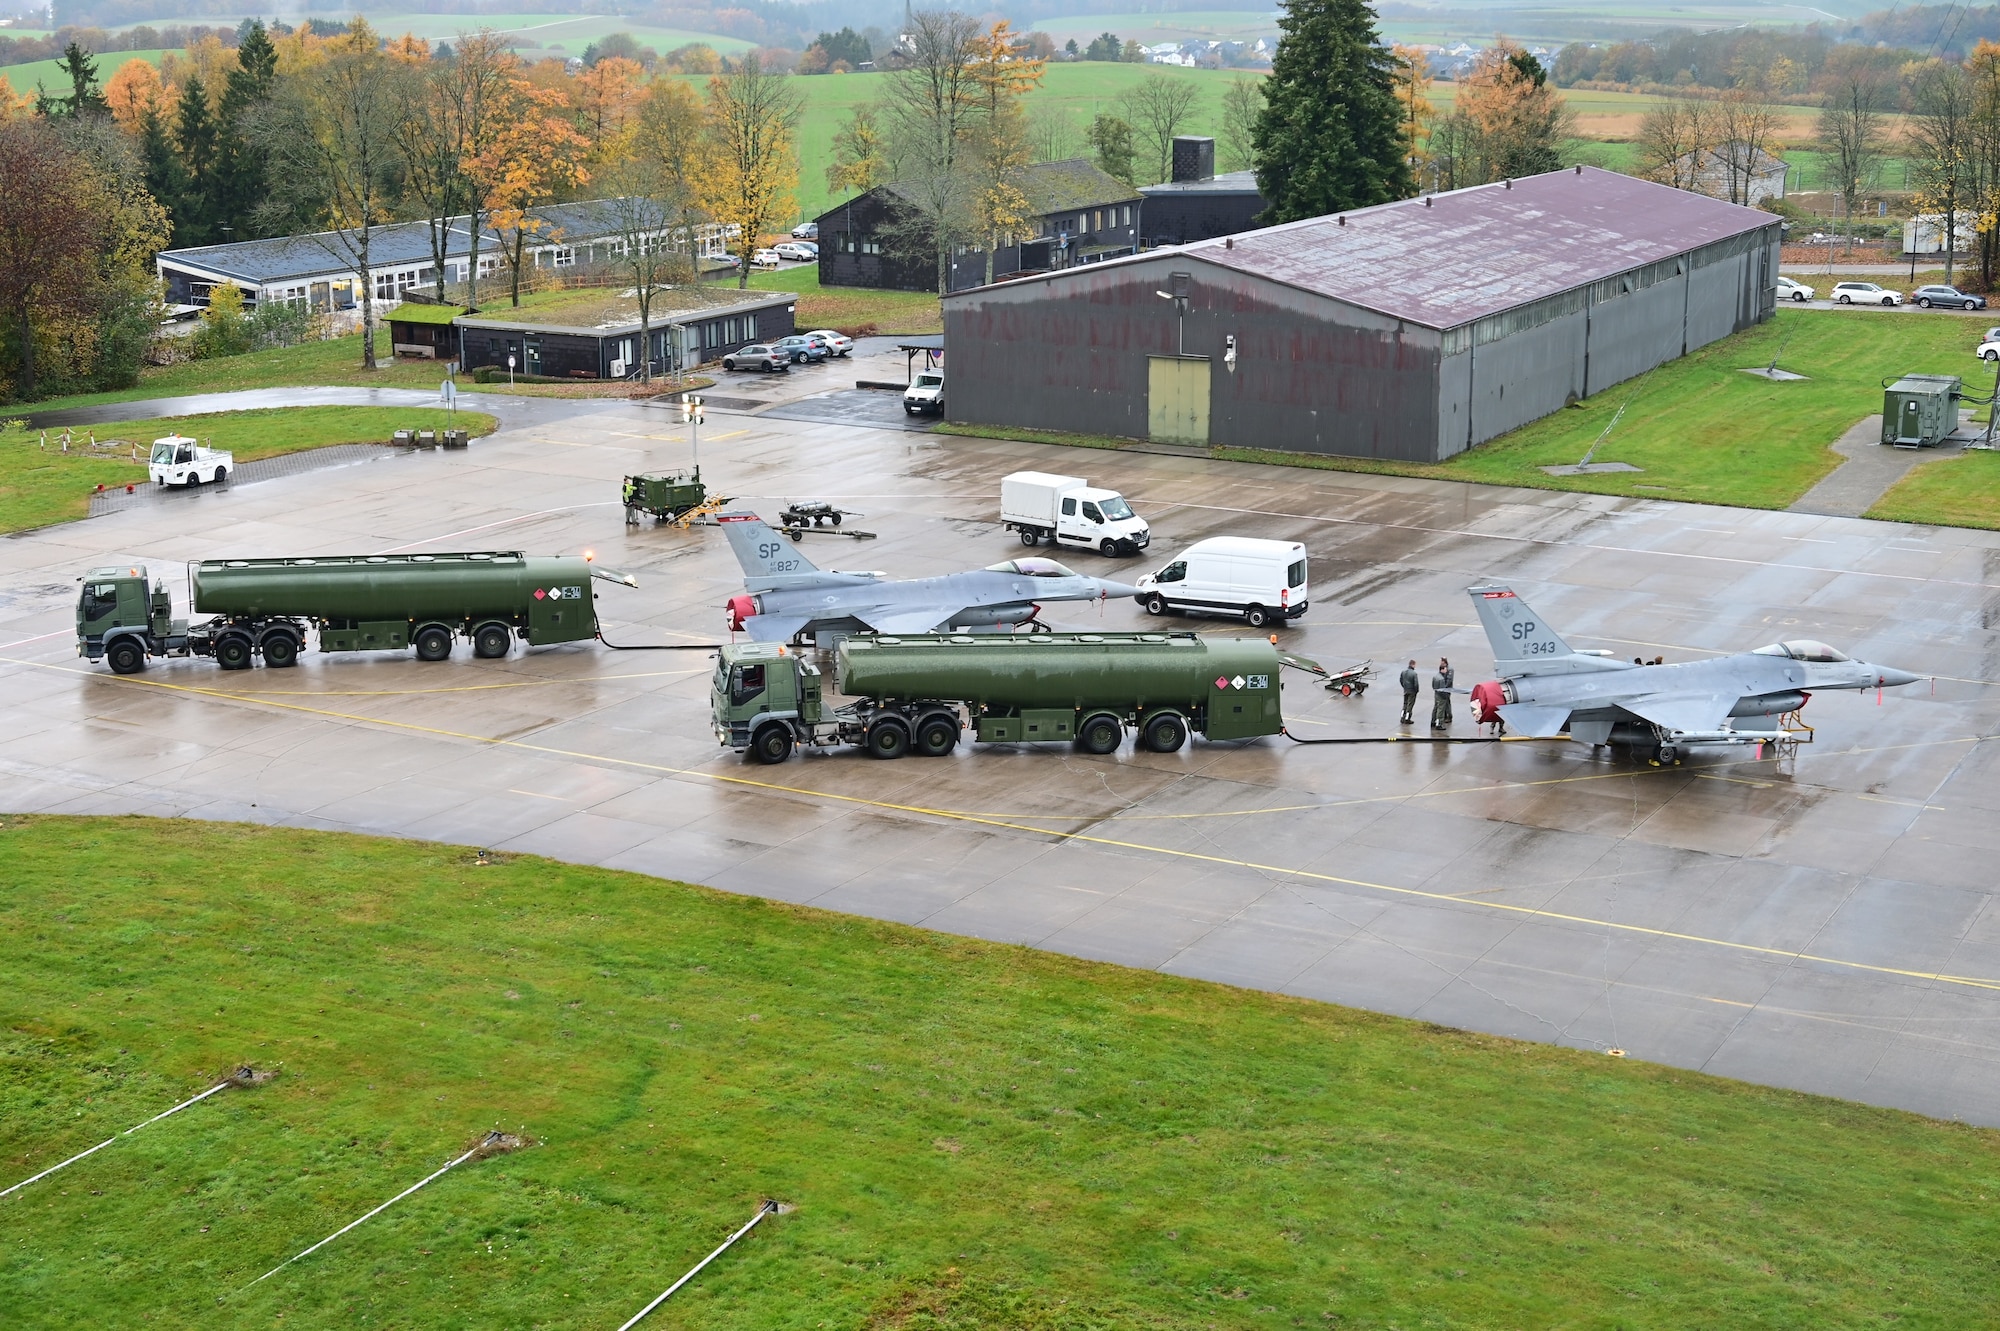 U.S. Air Force Airmen from the 52nd Aircraft Maintenance Squadron show members of the German Air Force how to refuel U.S. Air Force F-16C Fighting Falcon fighter jets during Castle Forge, an Agile Combat Employment exercise at Büchel Air Base, Germany, Nov. 3, 2021. The integration, part of a U.S. Air Forces in Europe-Air Forces Africa Agile Combat Employment event, gave both nations the opportunity to train together and improve interoperability for future operations and contingencies in the region. (Courtesy photo by Dr. Sandeep Mulgund)